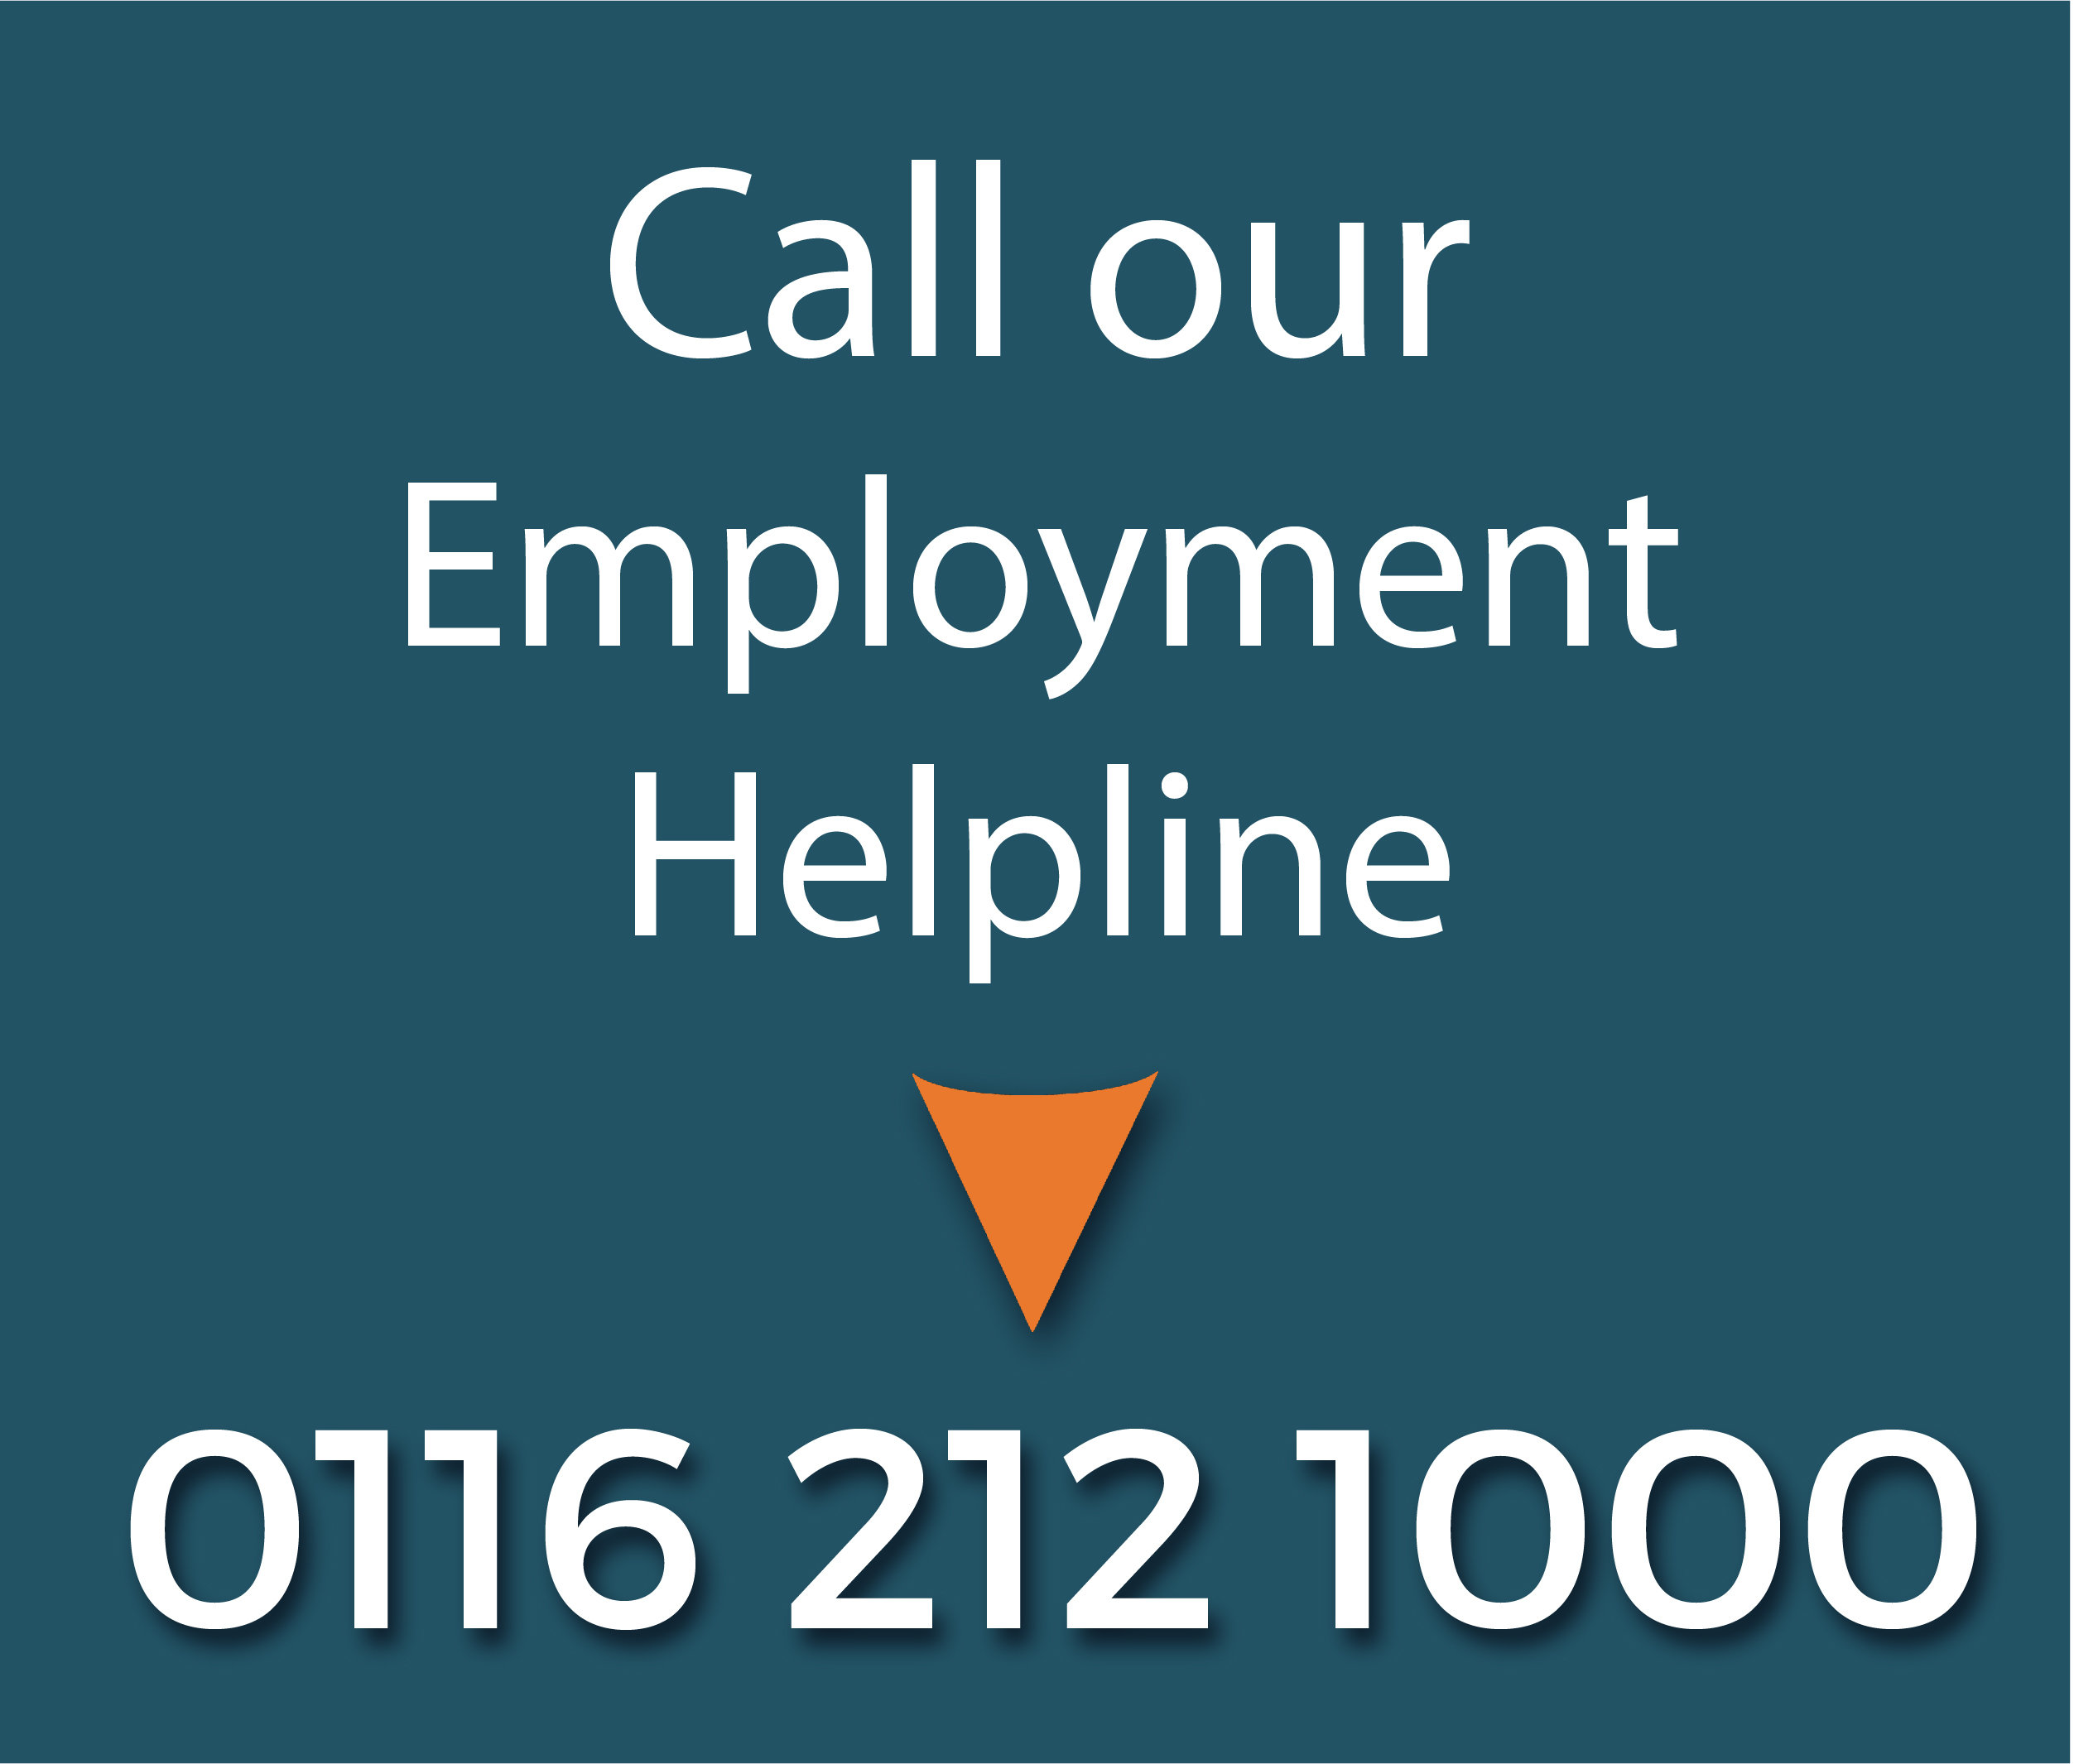 Employment Claims UK employment law helpline to help with claims against your employer in UK with qualified solicitors and advice